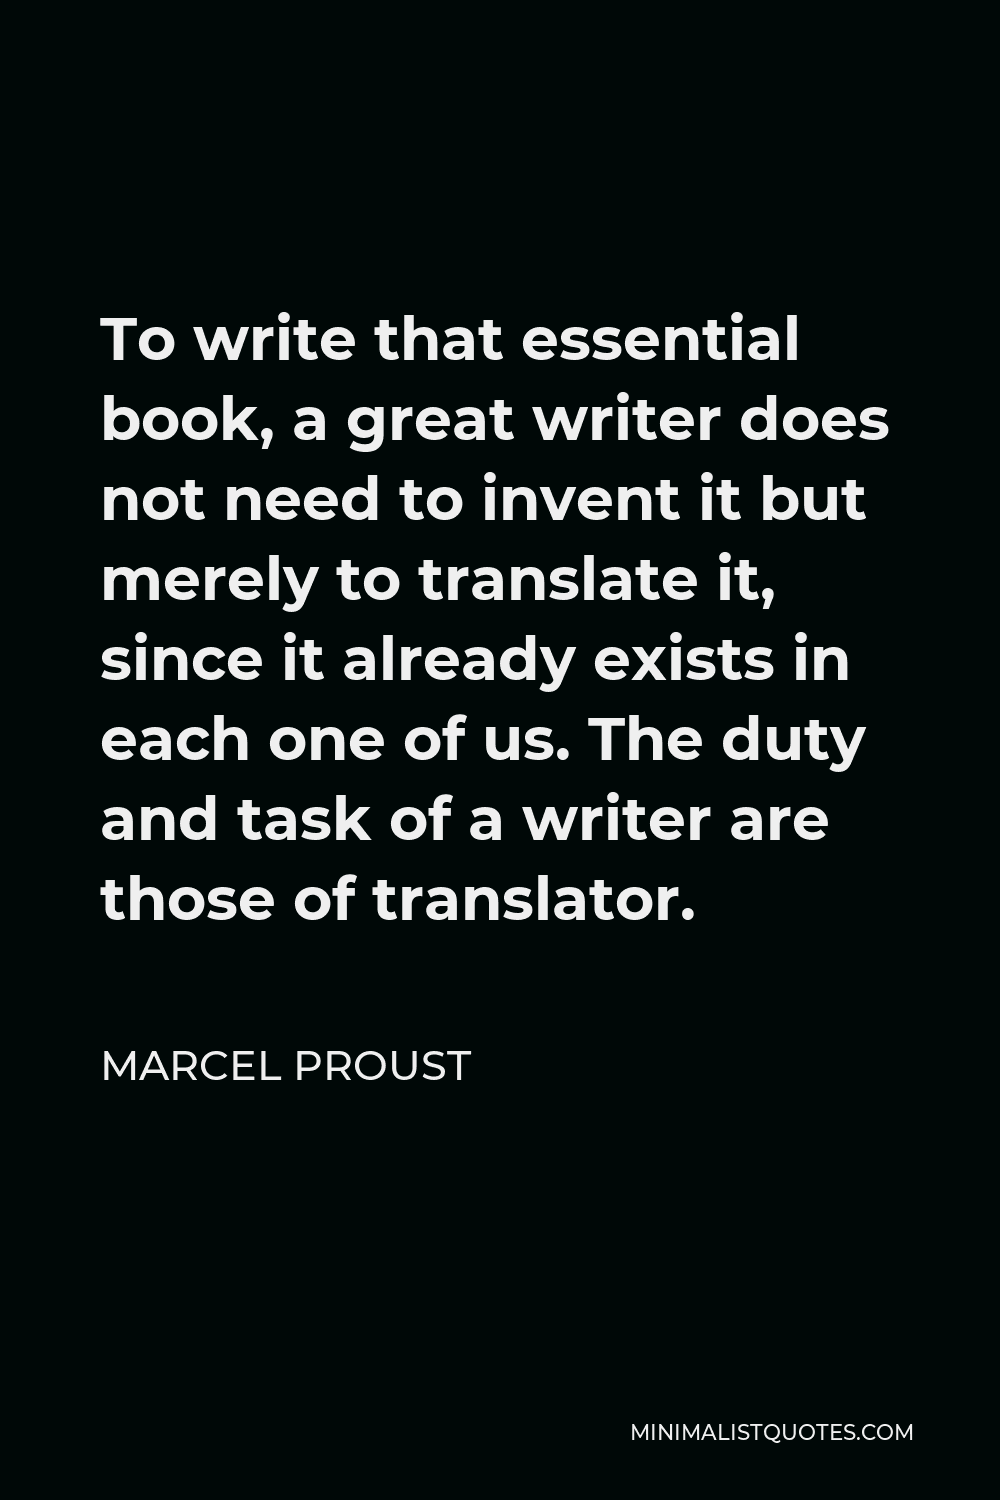 Marcel Proust Quote - To write that essential book, a great writer does not need to invent it but merely to translate it, since it already exists in each one of us. The duty and task of a writer are those of translator.